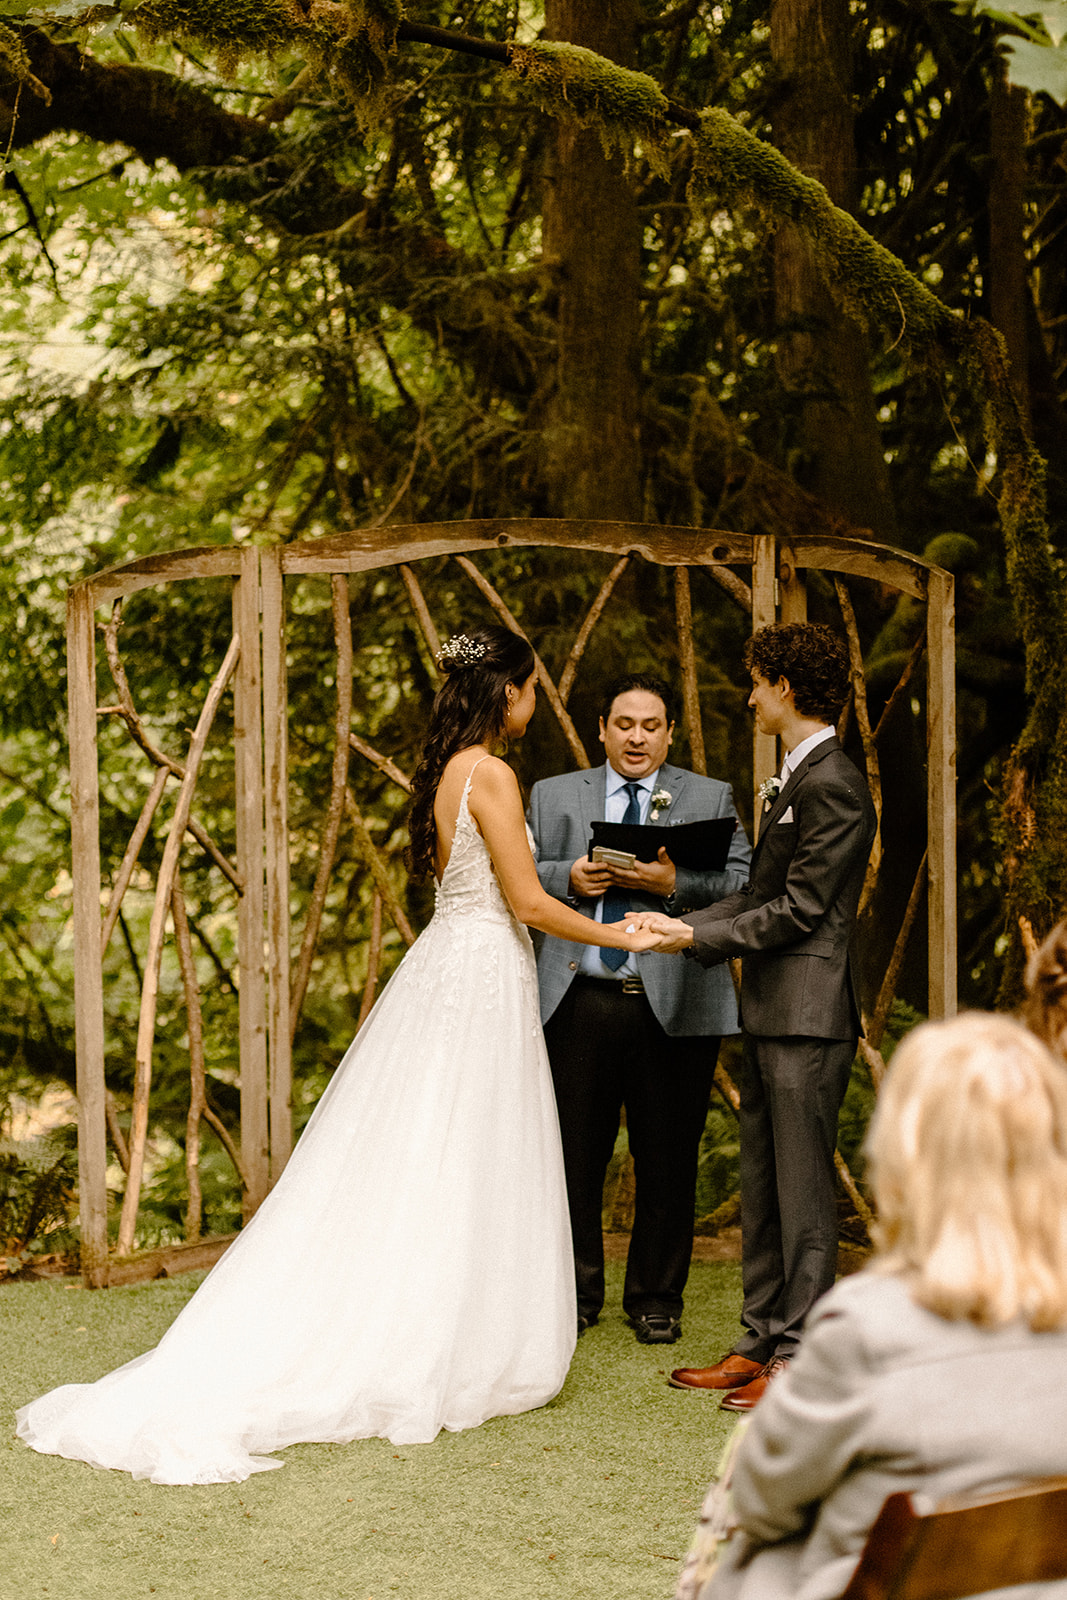 A Fun Intimate Wedding Day at Treehouse Point in Fall City Washington With Elegant Wedding Decor